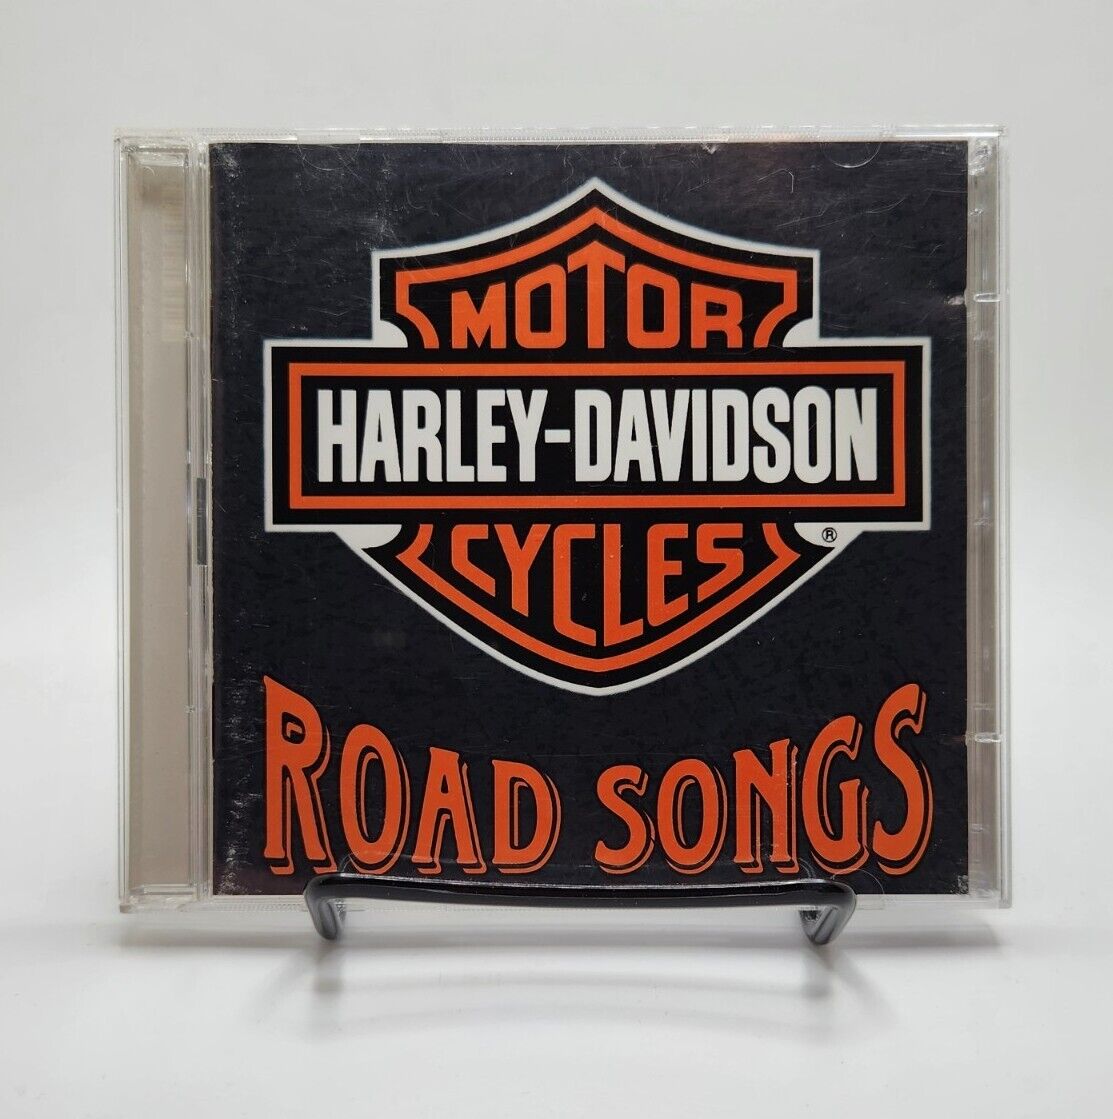 Harley-Davidson Cycles: Road Songs - Audio 2 Disc CD By Various Artists - 1994